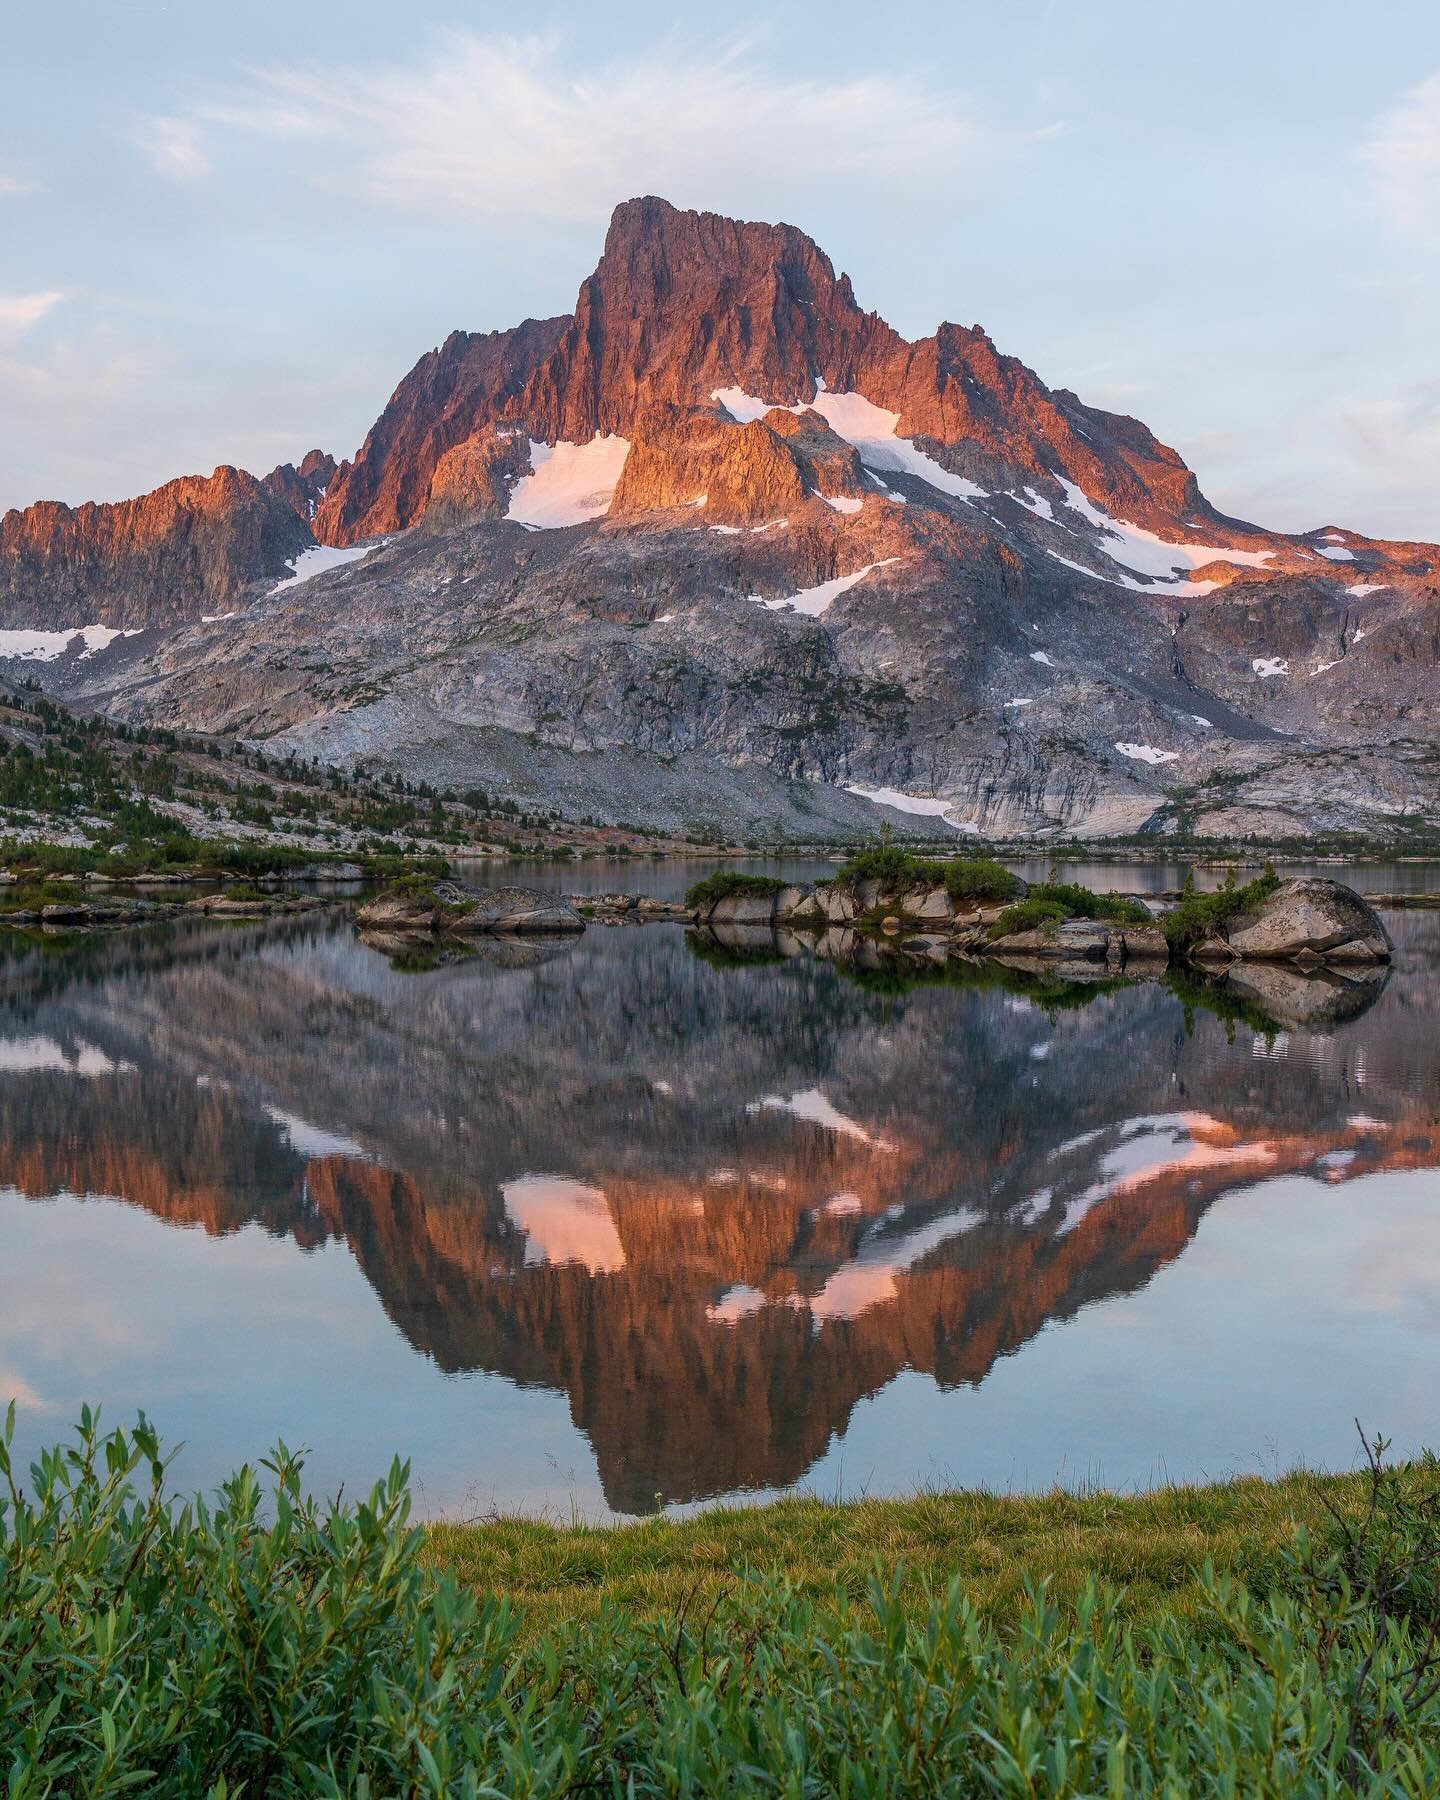 Want to see this iconic view? Keep reading for all the details and share with your favorite backpacking buddy! ⛰️

📍Thousand Island Lake, Inyo National Forest

Located in the Ansel Adams Wilderness, Thousand Island Lake is one of the most premiere b